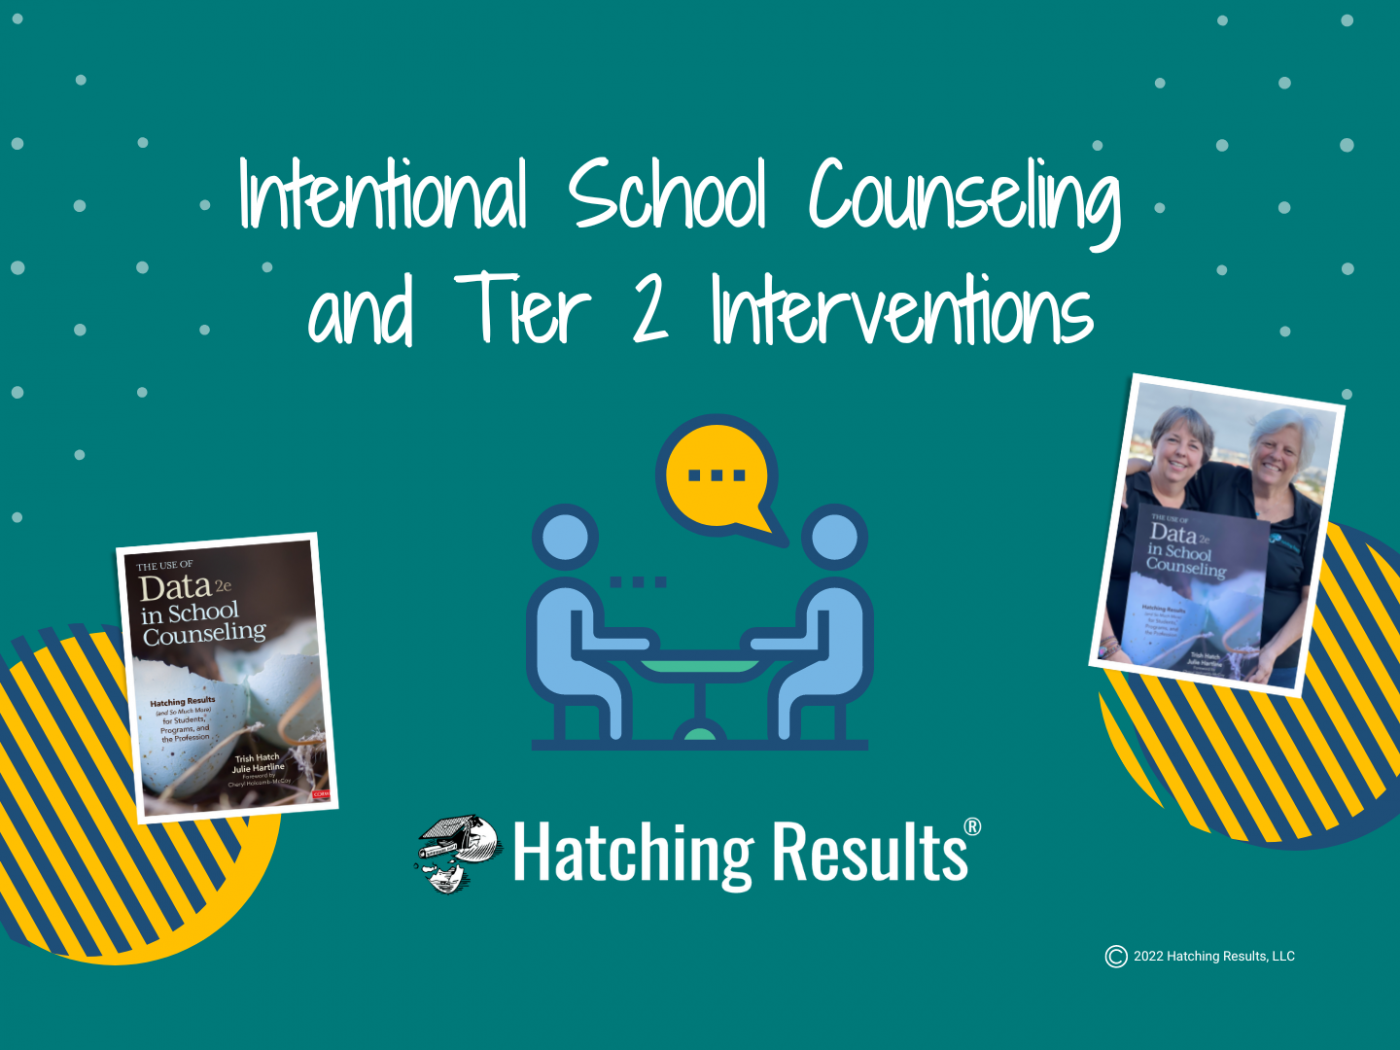 DEMO - Intentional School Counseling and Tier 2 Interventions